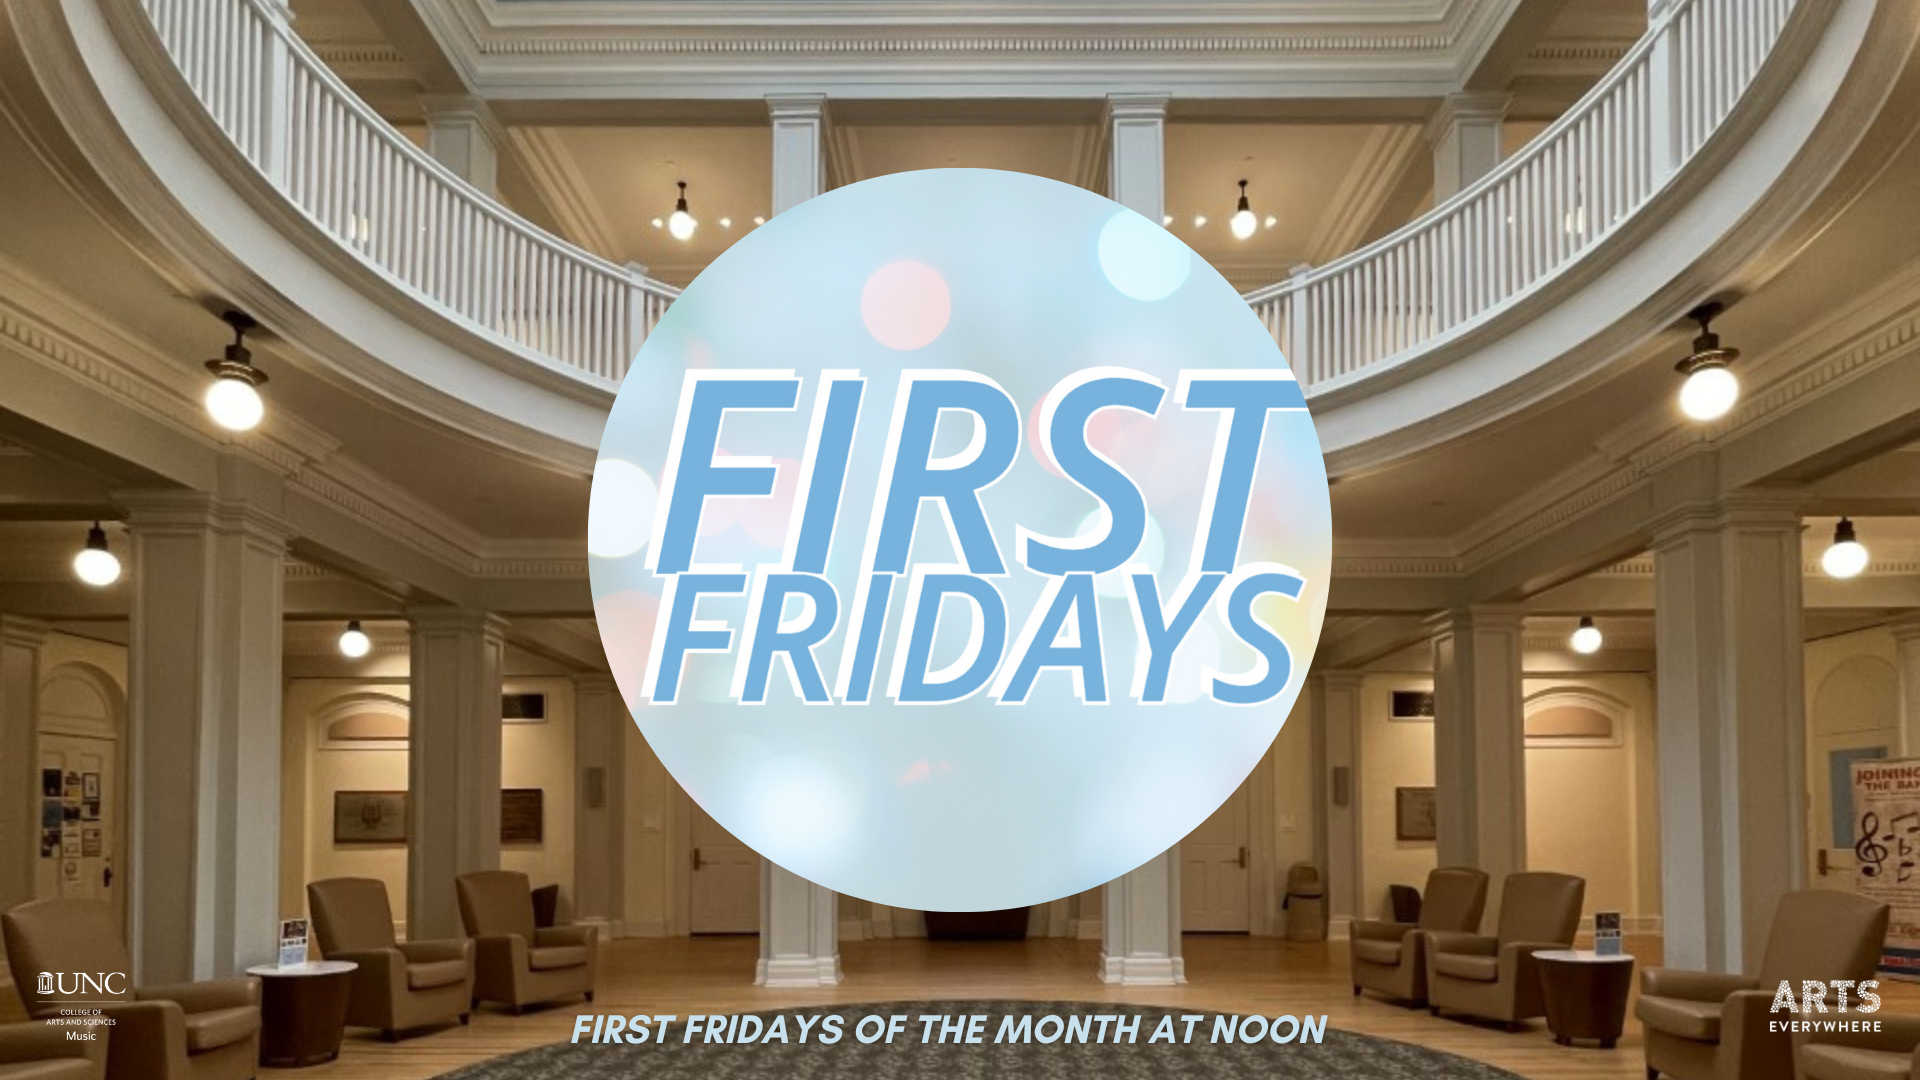 First Fridays logo with the Hill Hall rotunda in the background, text reads "First Fridays of the month at Noon"